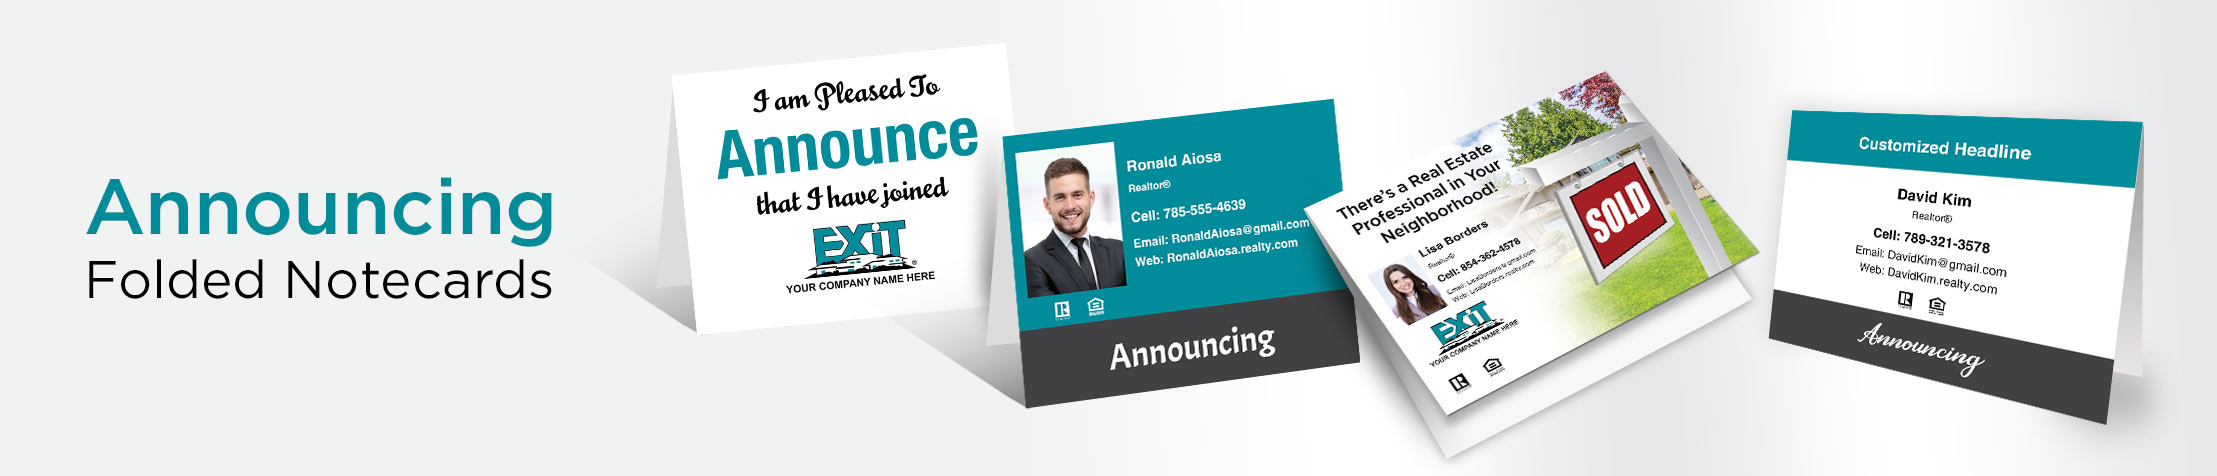 Exit Realty Announcing Folded Note Cards - Exit Realty approved vendor note card stationery | BestPrintBuy.com